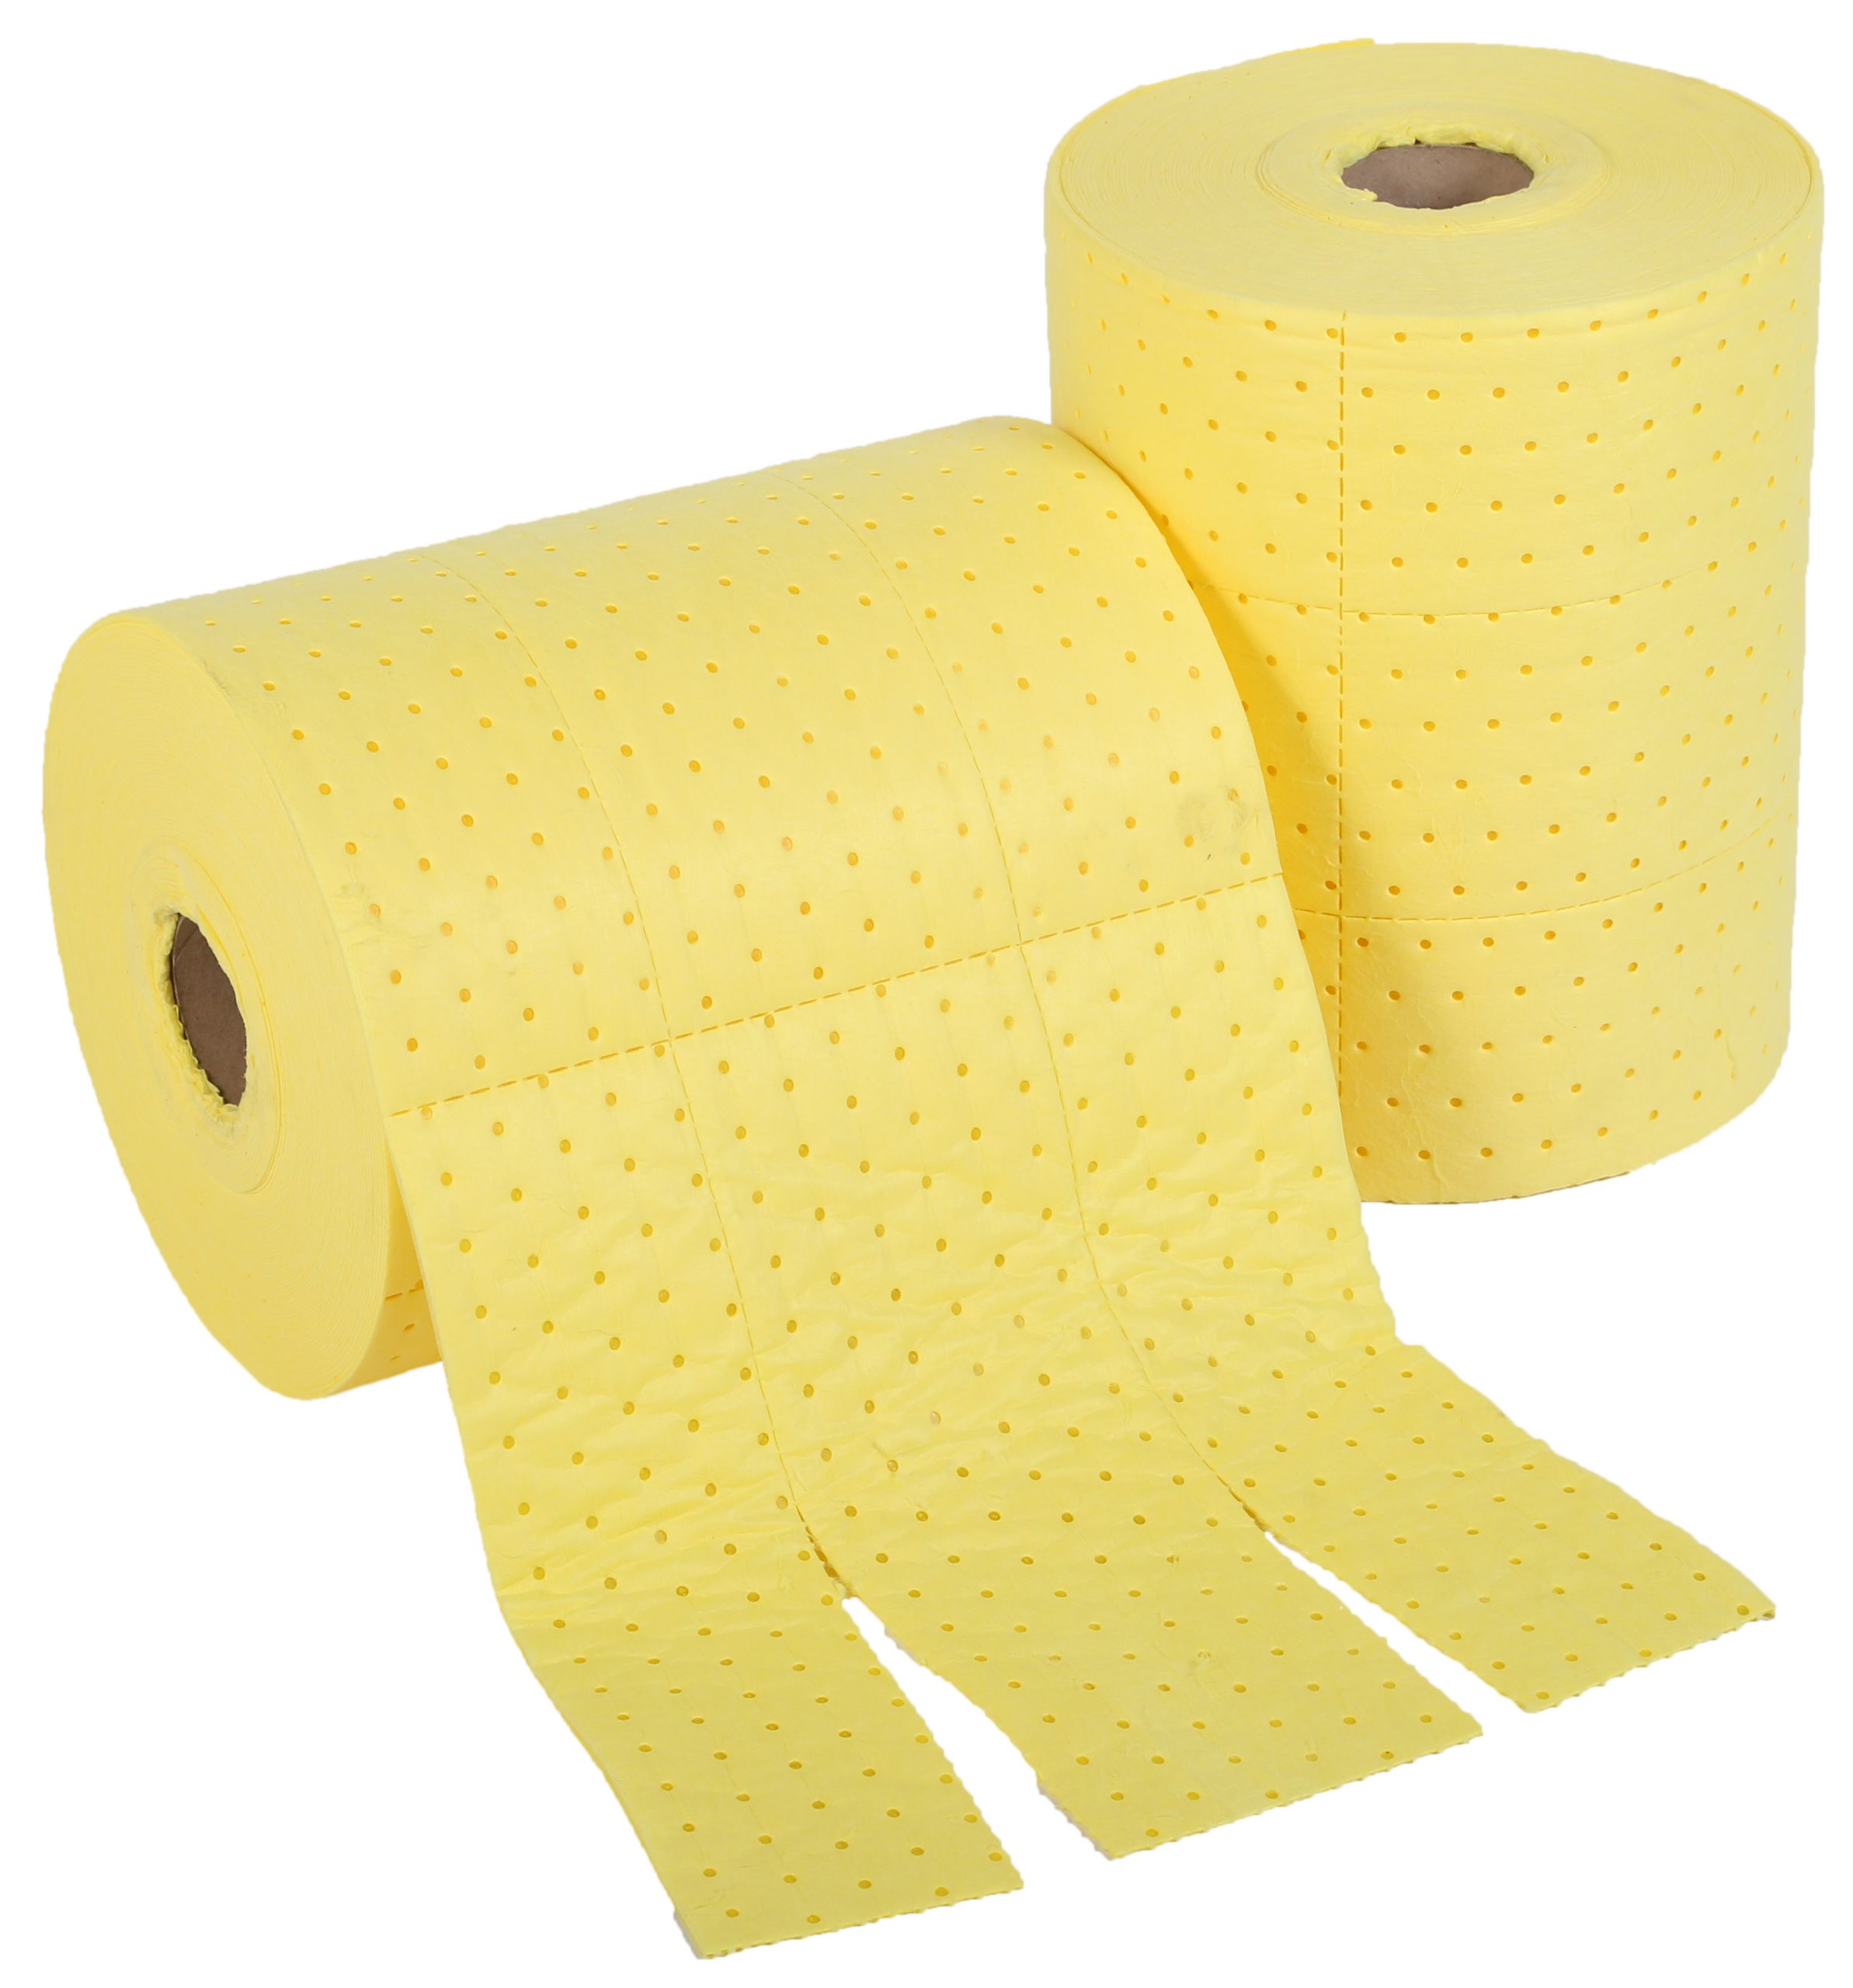 Oil Absorbent Rolls and Pads